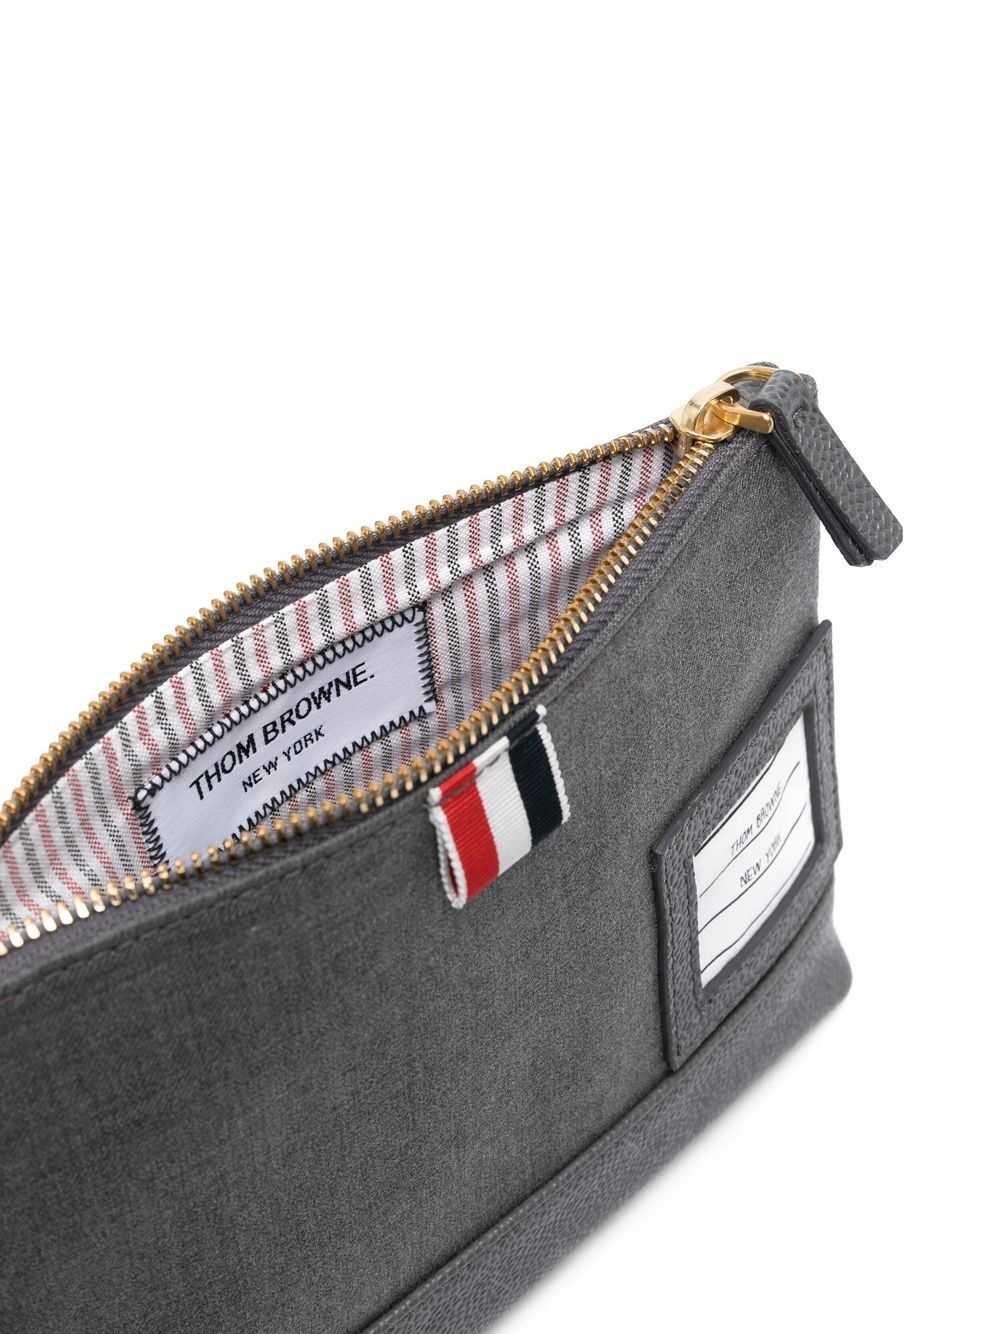 twill-weave zipped pouch - 3